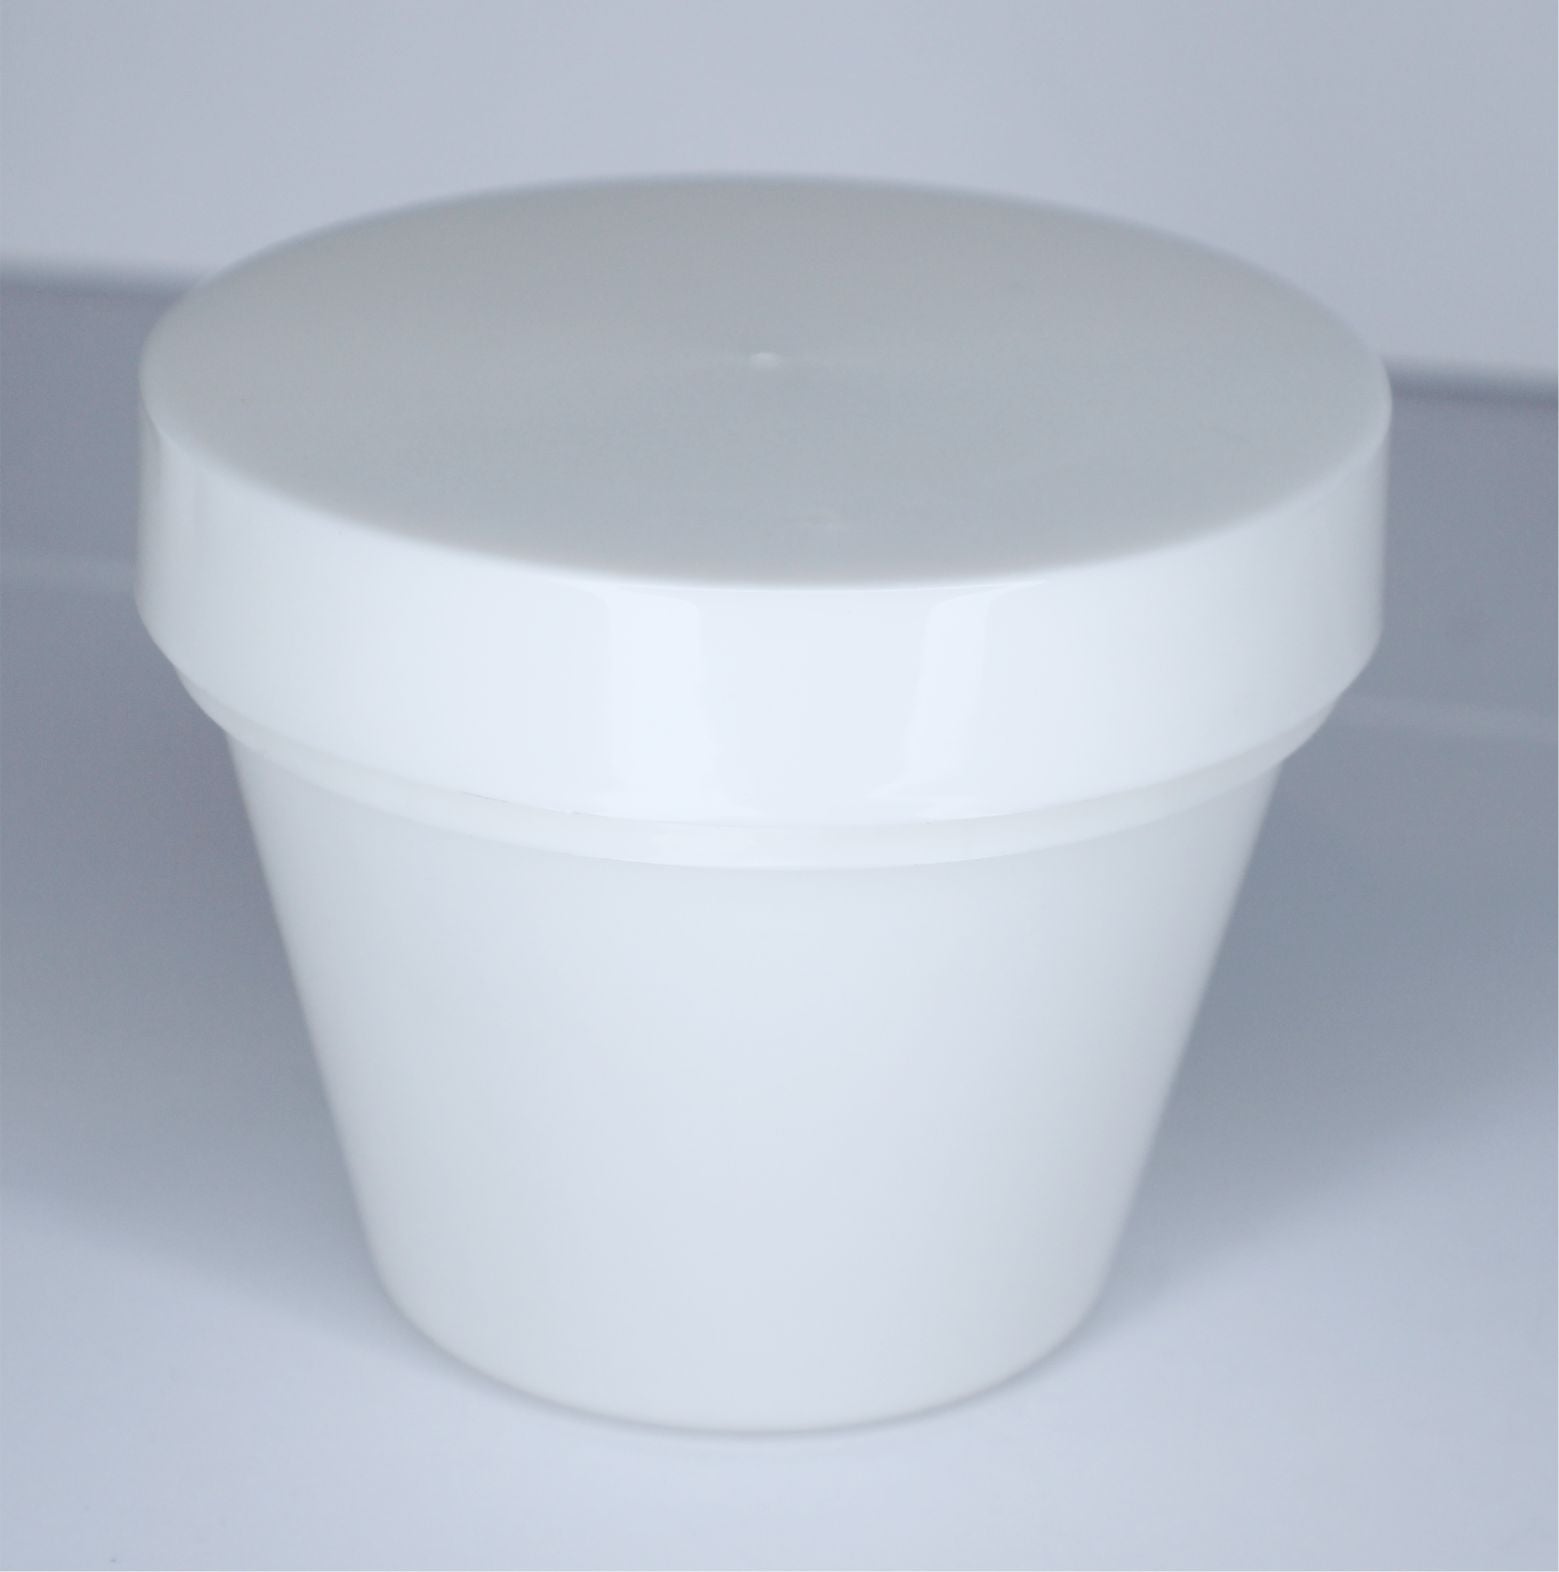 Child Resistant Tamper Evident Ice Cream Bowl for Cannabis Infused edibles , butter, yogurts THC, CBD products. FreezAbowl.com 